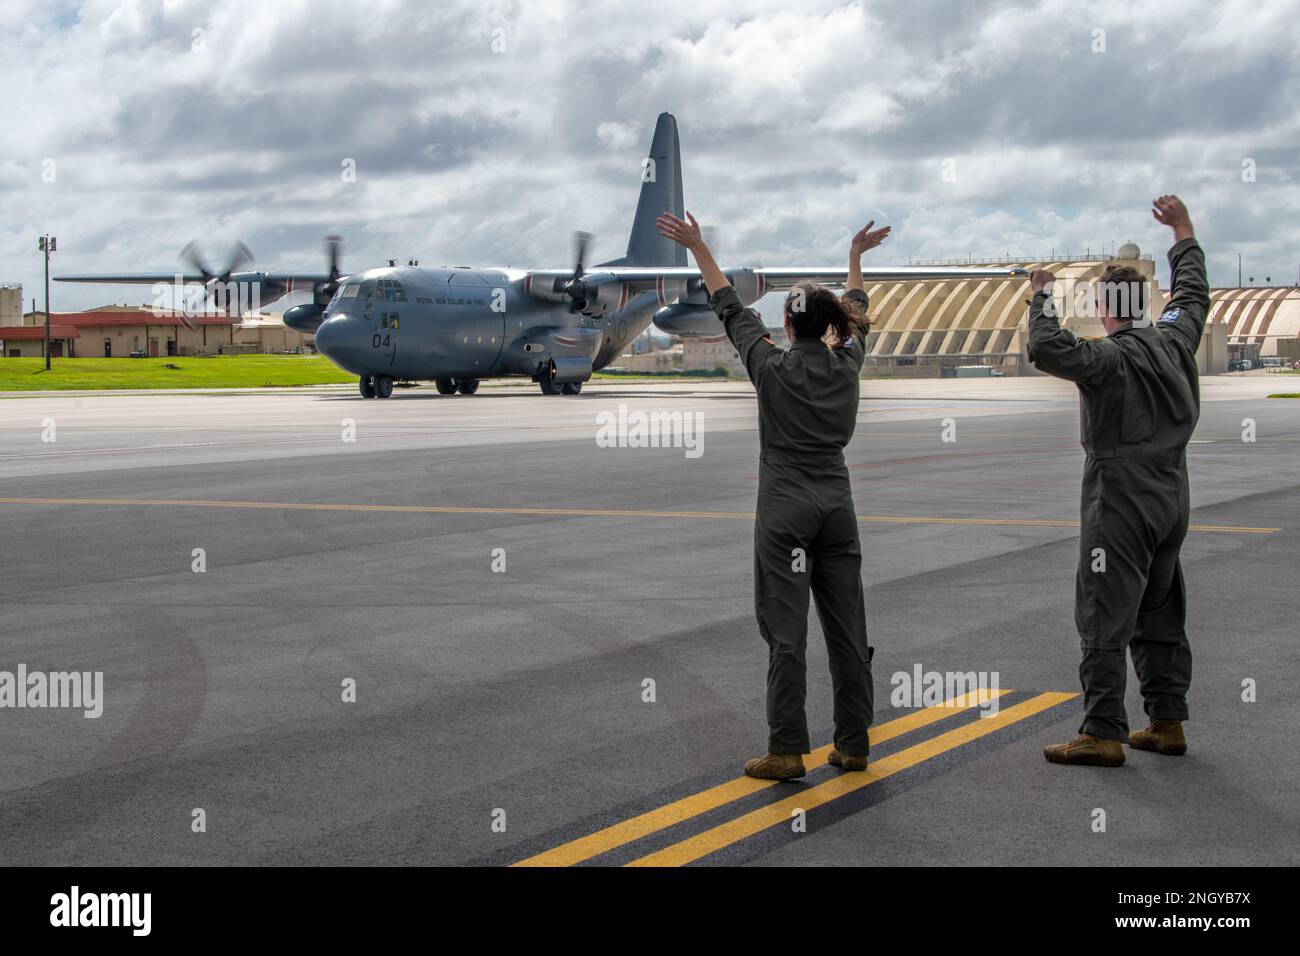 (Left to right) U.S. Air Force Capt. Jenn Brenton, and Capt. Andrew Zaldivar, 36th Expeditionary Airlift Squadron, greet a Royal New Zealand Air Force C-130H Hercules at Andersen Air Force Base, Guam, Dec. 1, 2022, during Operation Christmas Drop 2022. Operation Christmas Drop is the longest-running Department of Defense humanitarian mission that delivers critical aid to island communities throughout the western Pacific while also providing an opportunity for aircrew to hone important skills needed for future operations. Stock Photo